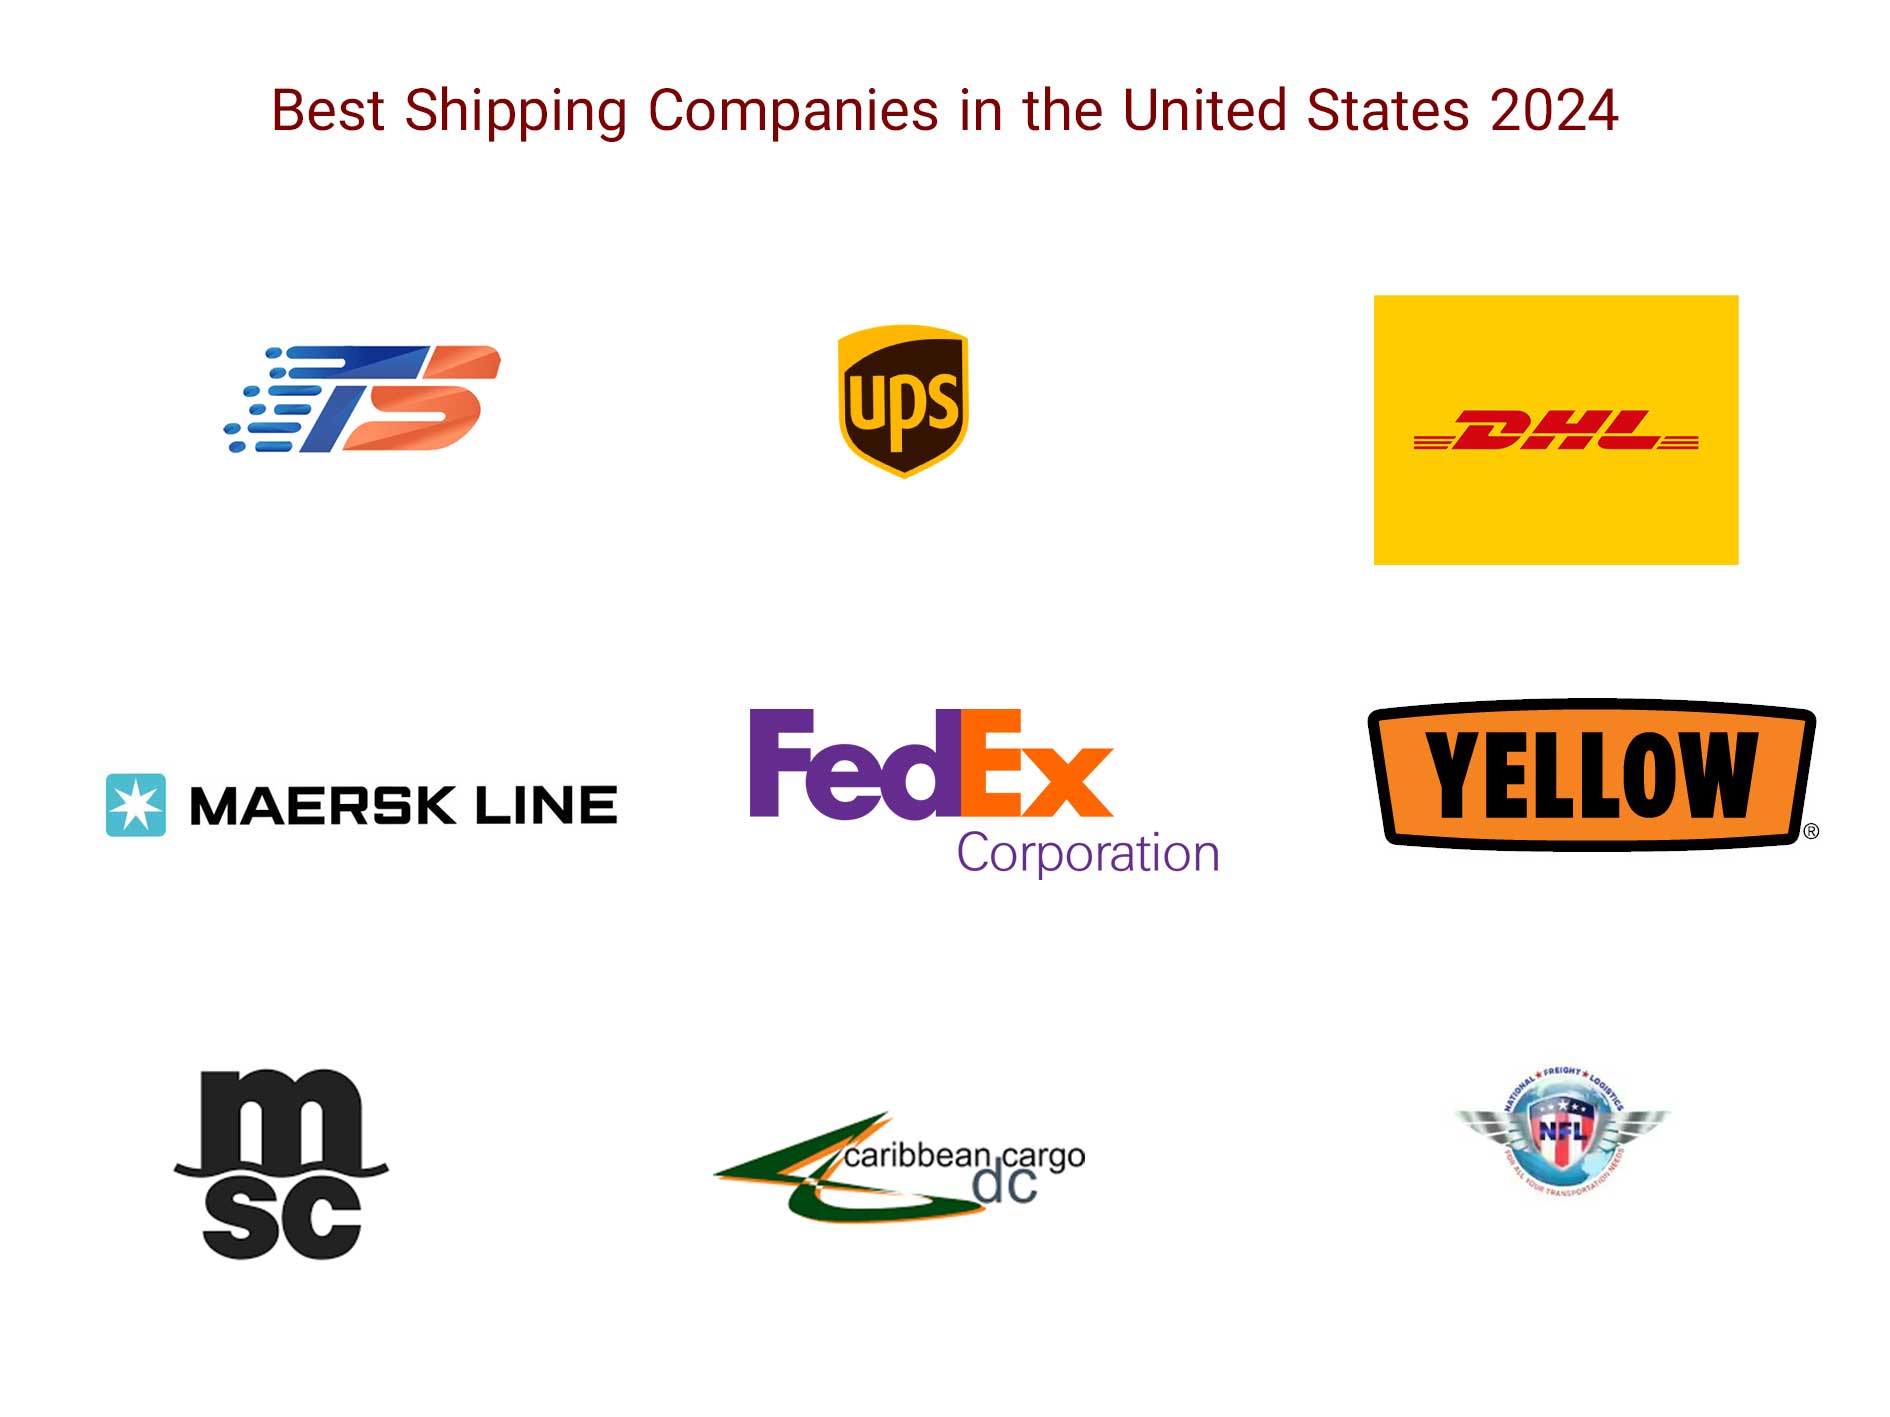 Best Shipping Companies in the United States (2024)